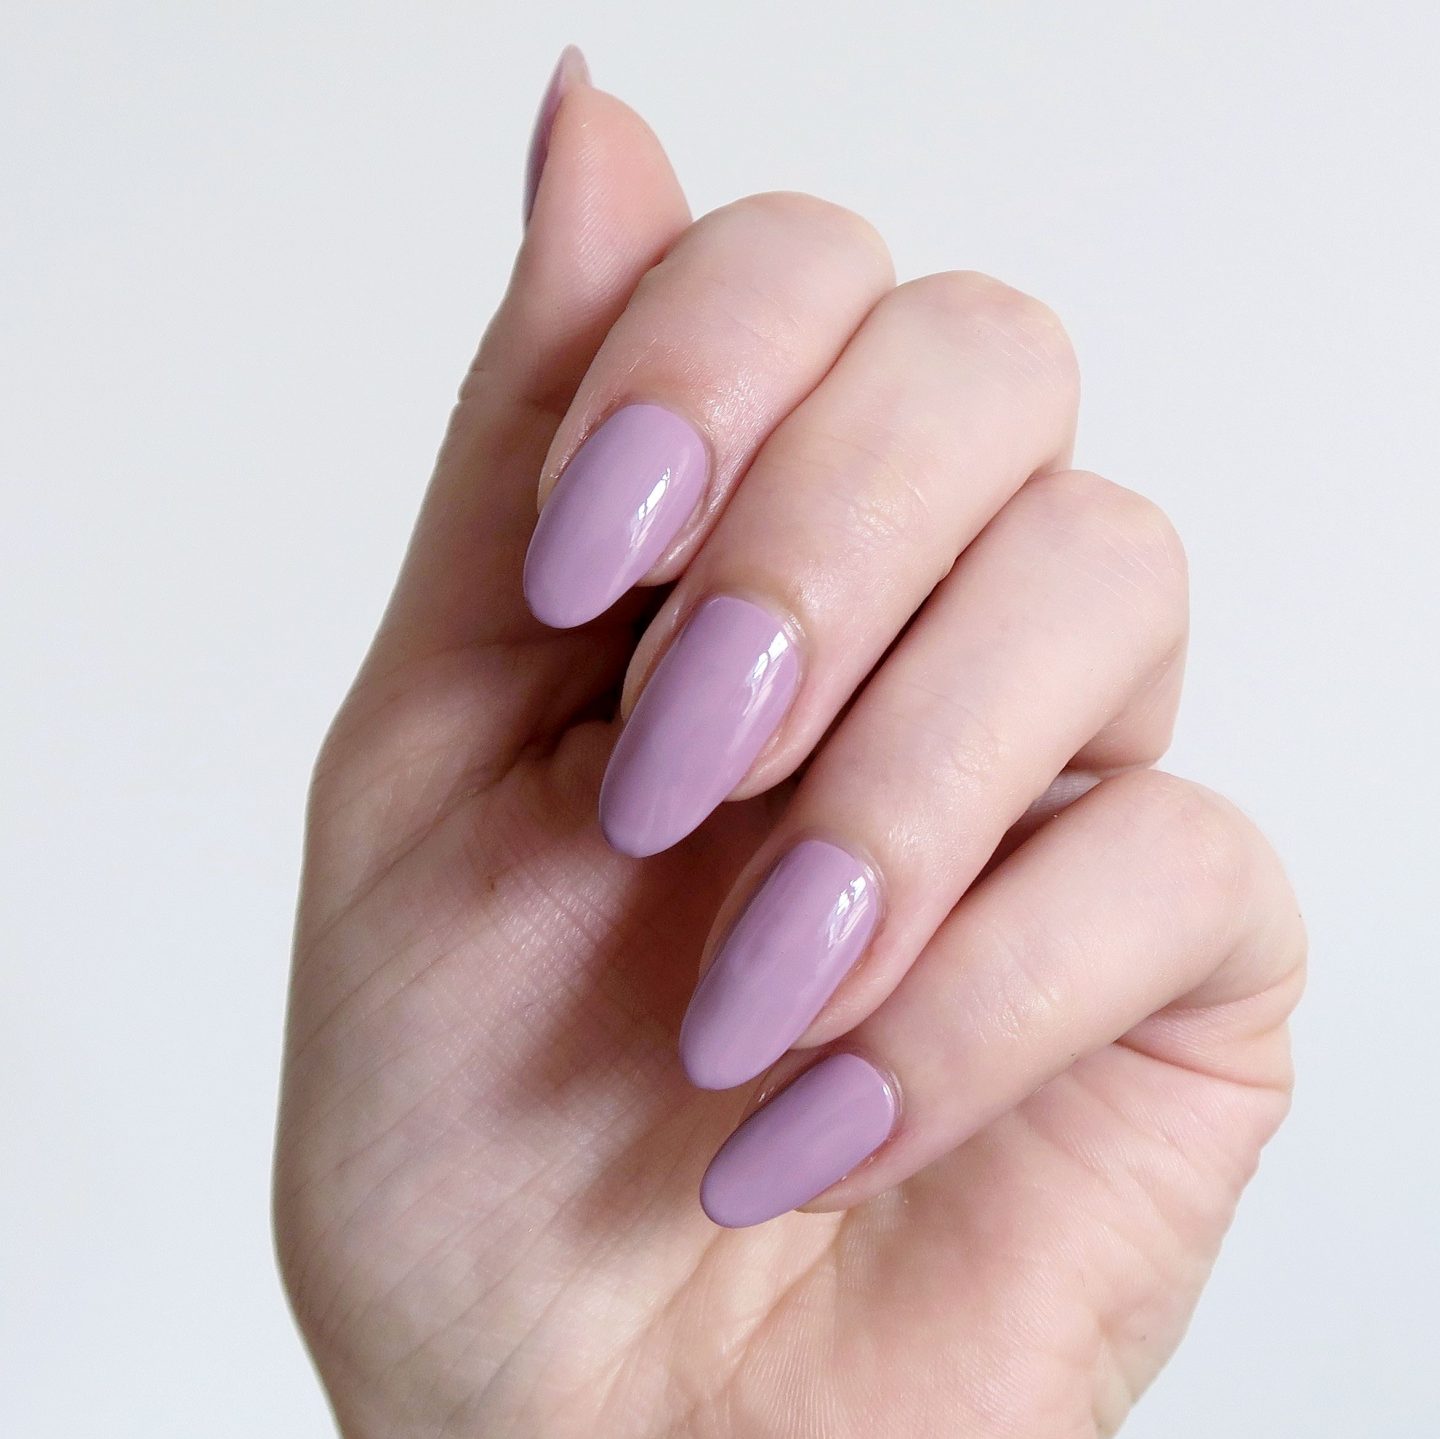 Repin and click to see my review of the new Morgan Taylor Color Of Petals collection. Morgan Taylor 'Merci Bouquet' - a light lilac creme nail polish inspiration. Spring manicure inspiration. #talontedlex